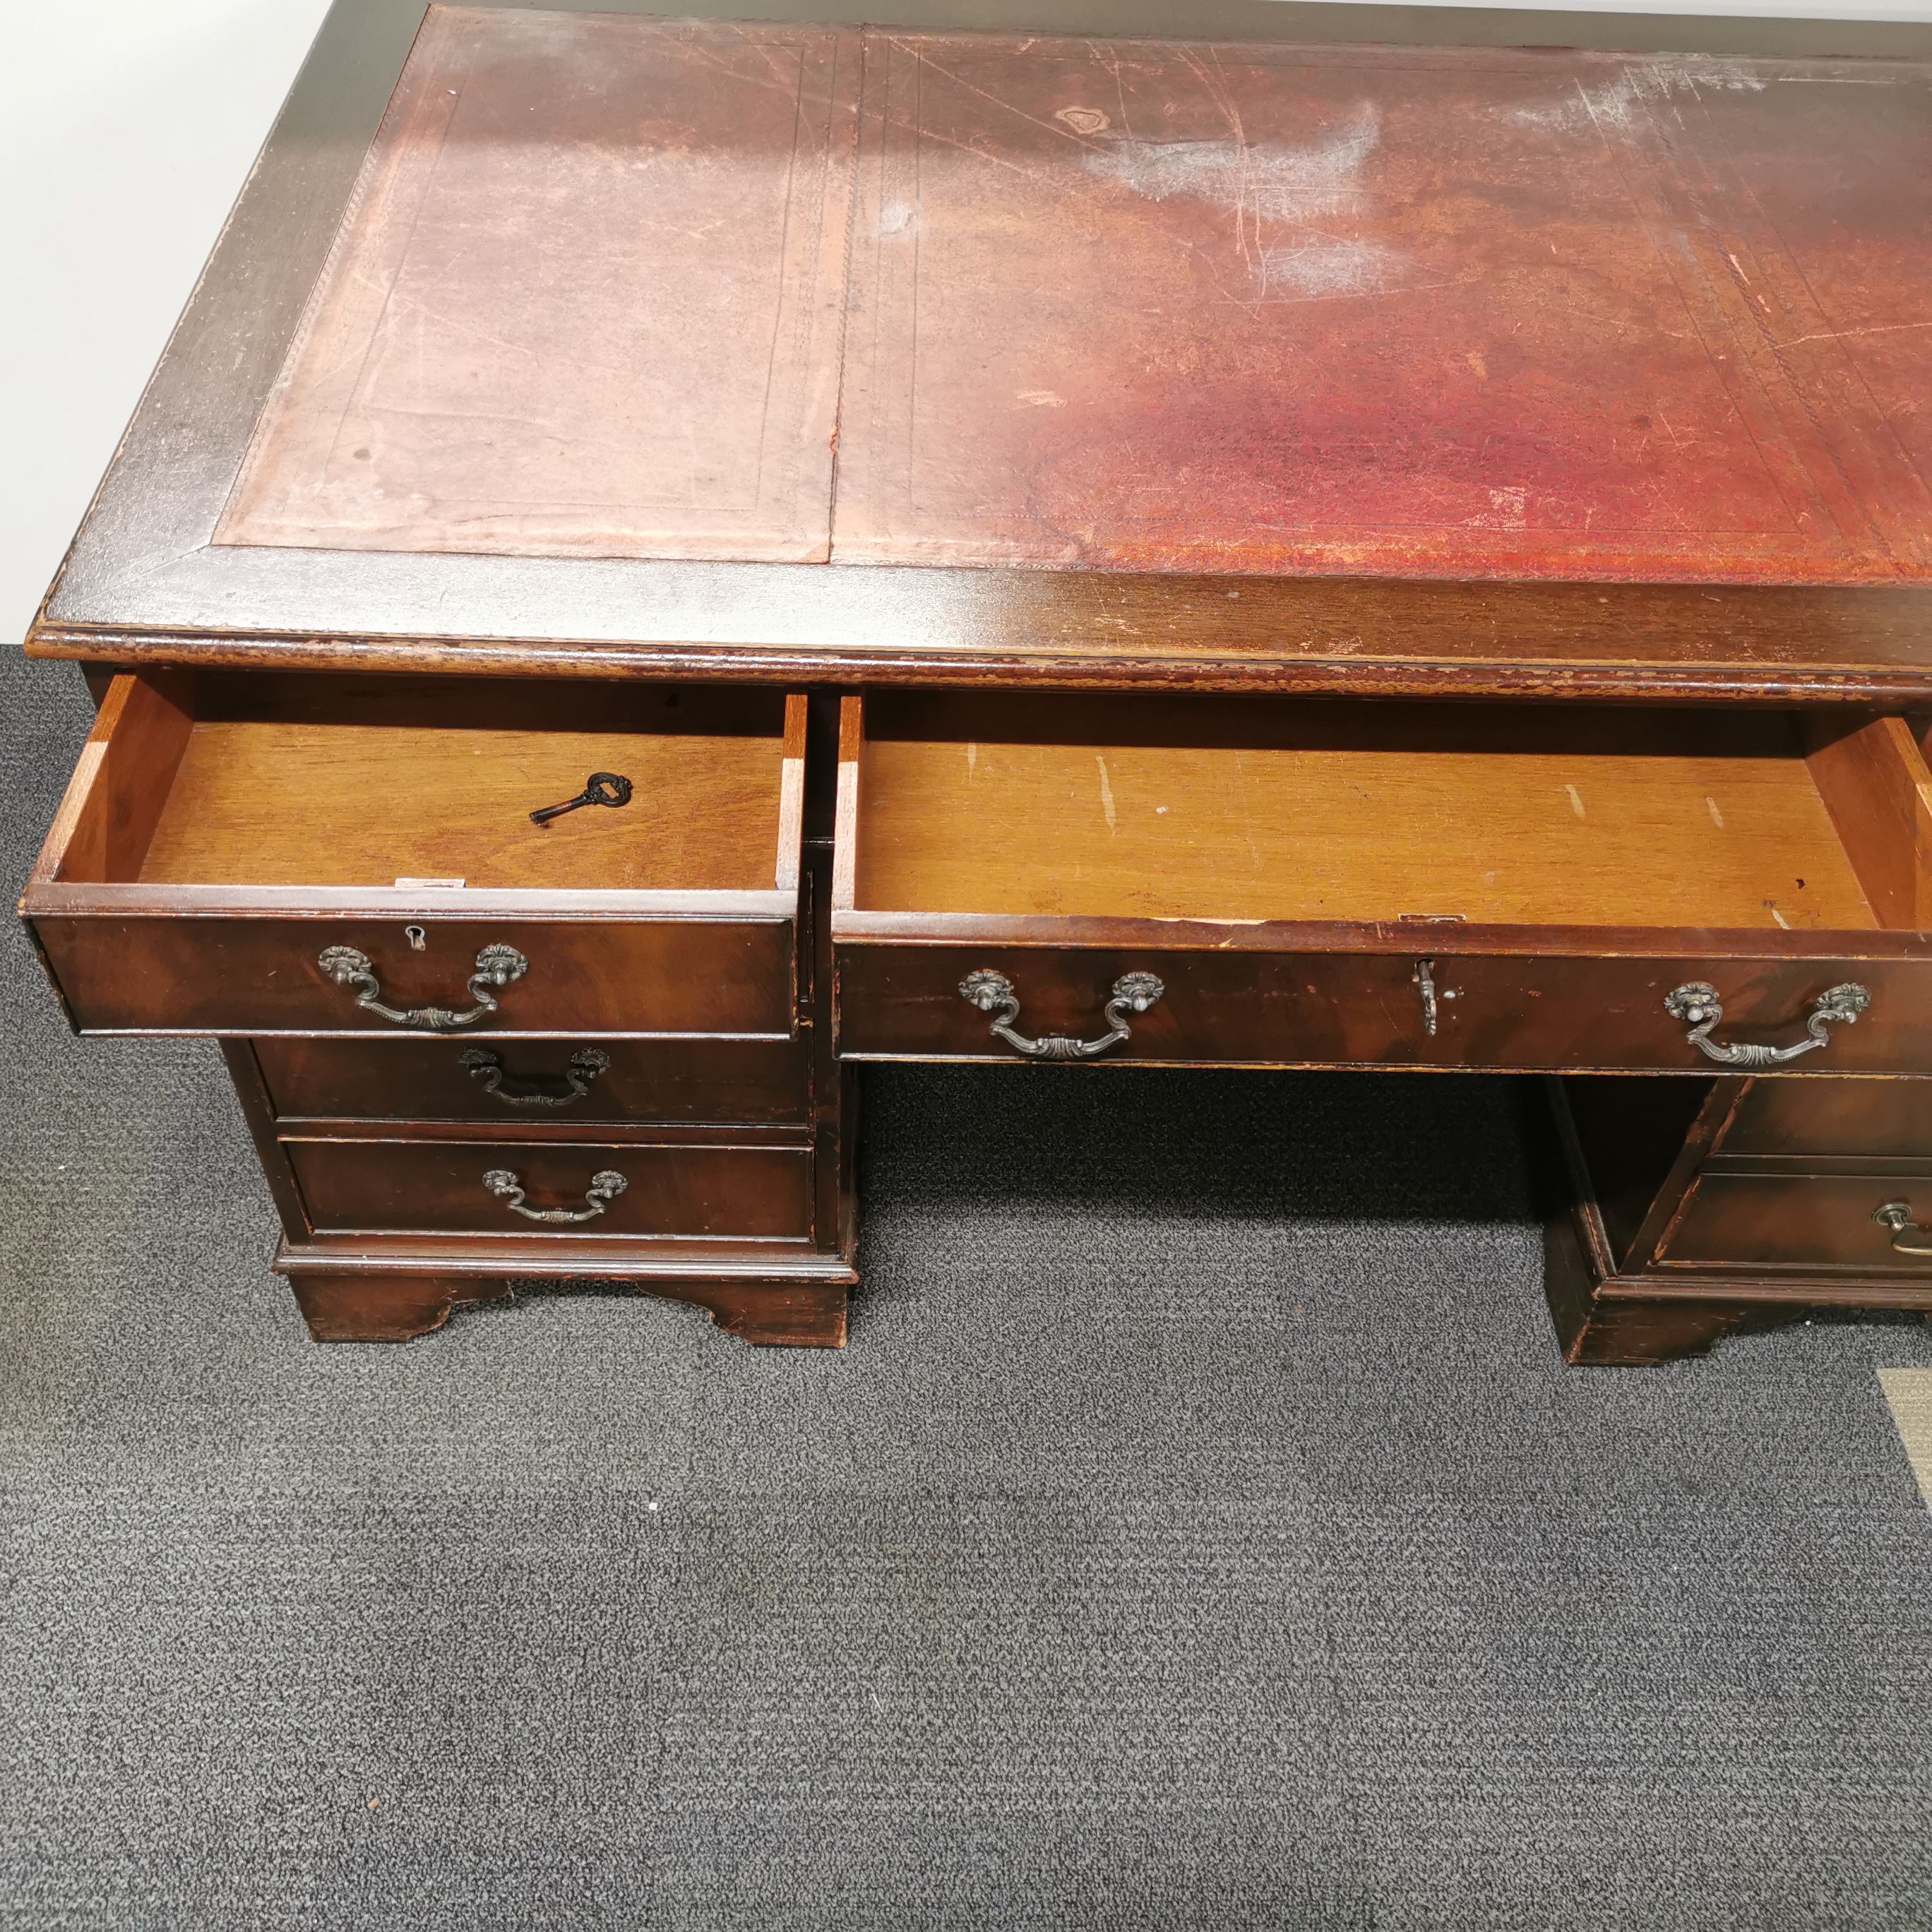 A mahogany eight drawer leather topped, knee hole desk, 155 x 90 x 77cm. - Image 3 of 4